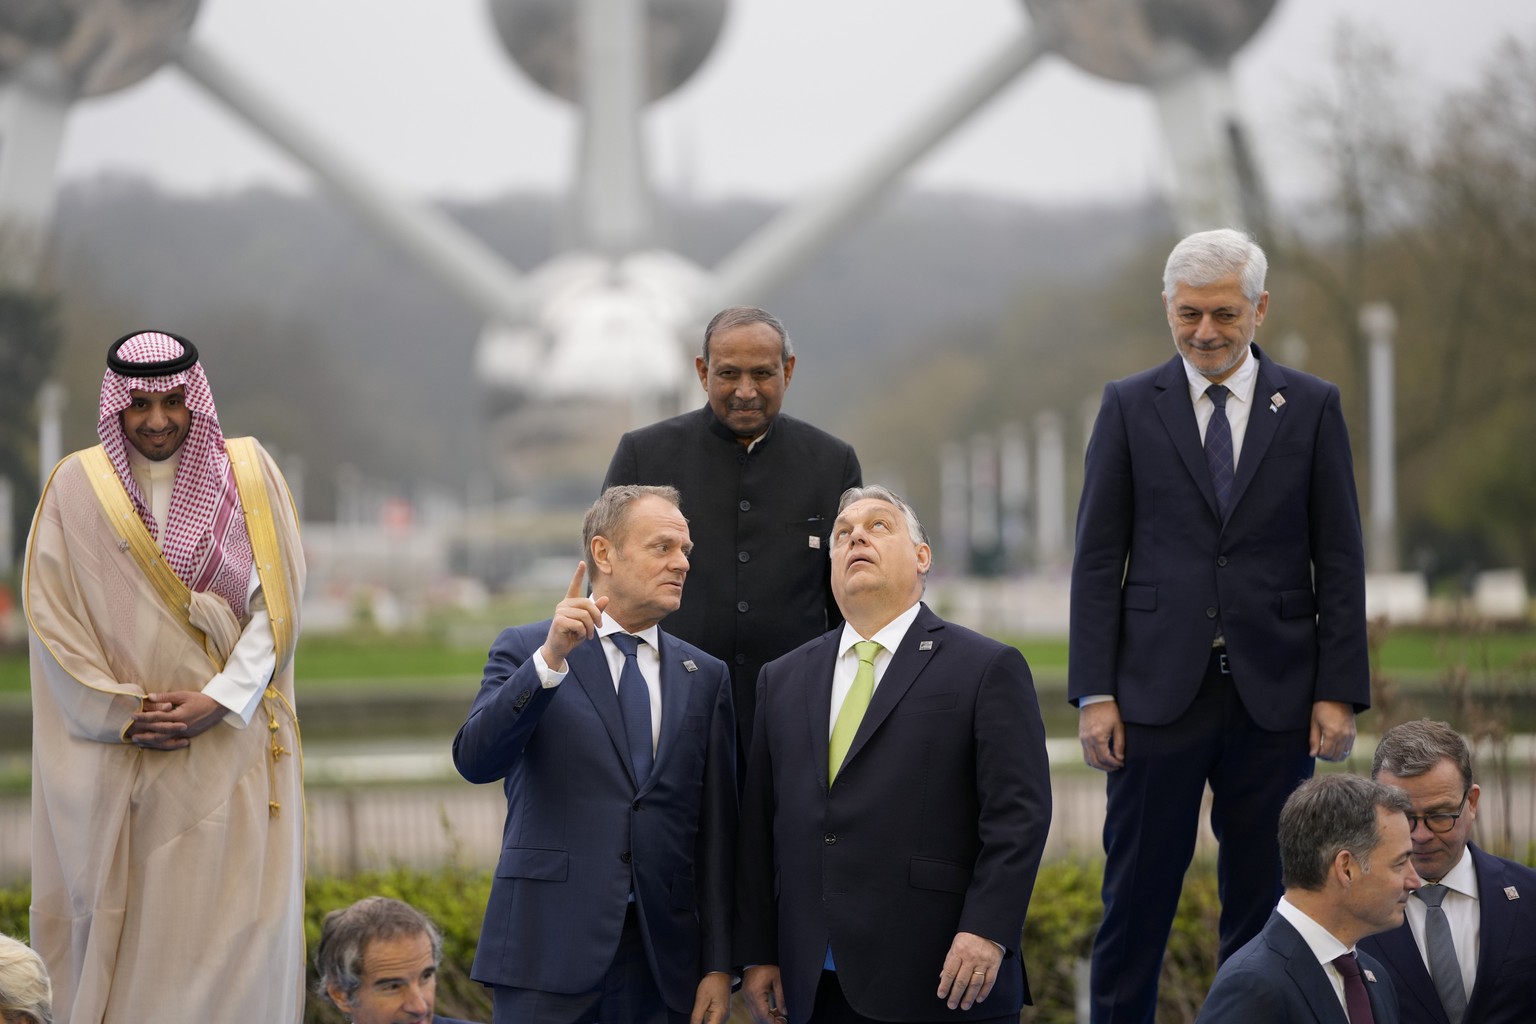 Hungary&#039;s Prime Minister Viktor Orban, center right, speaks with Poland&#039;s Prime Minister Donald Tusk, center left, as they pose for a group photo in front of the Atomium during an Nuclear En ...